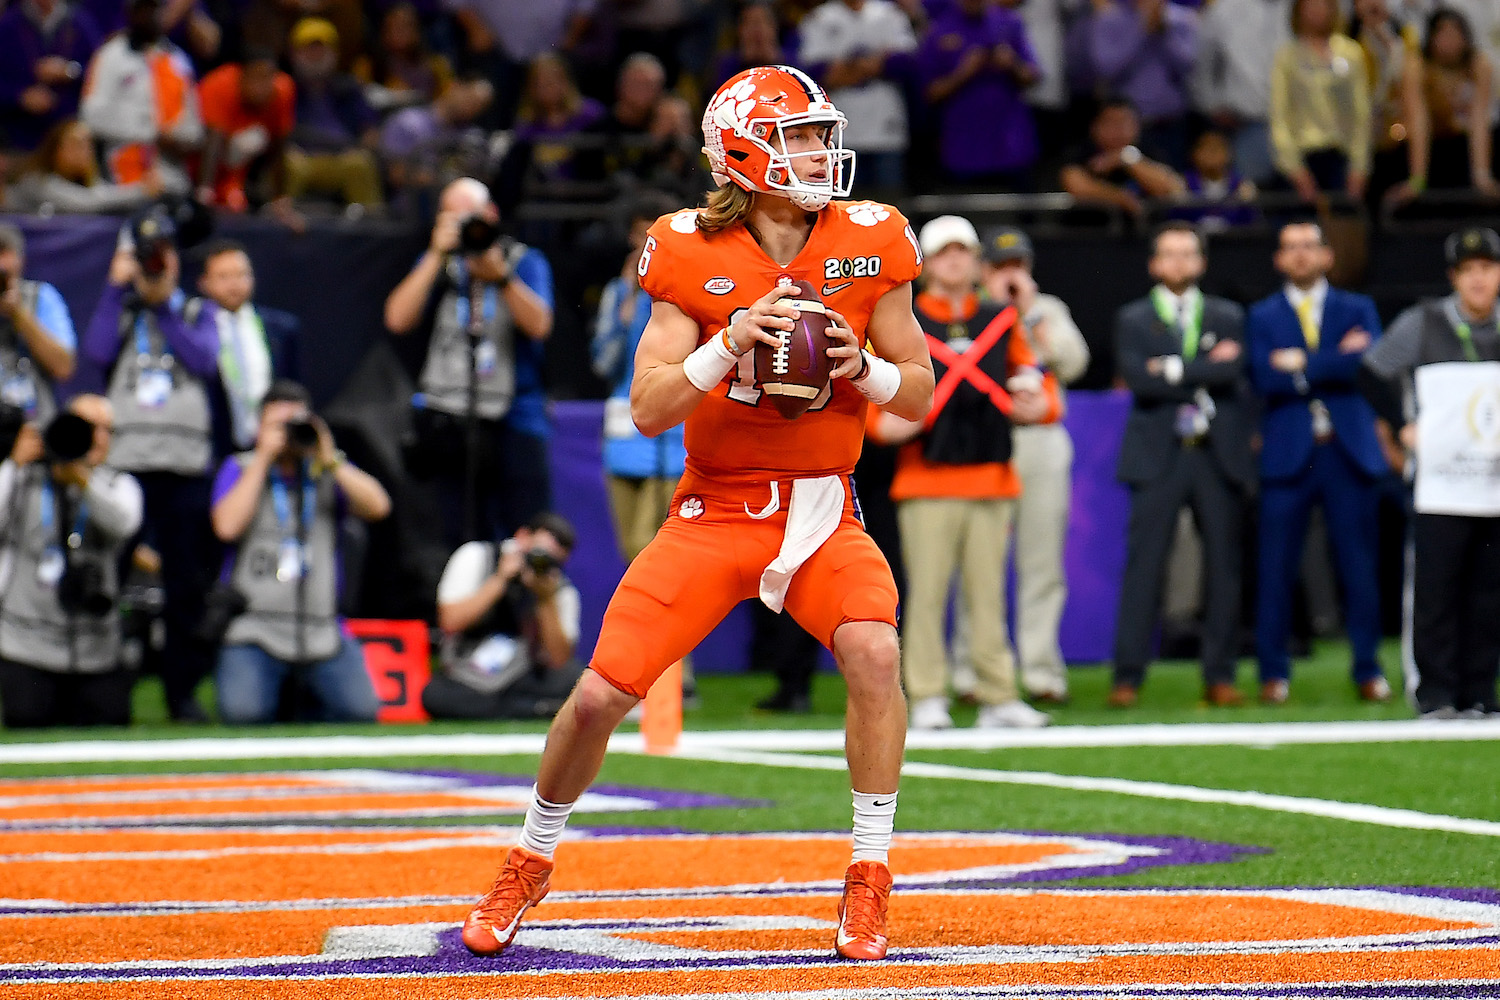 Trevor Lawrence Would Make $2.4 Million a Season According to New Report